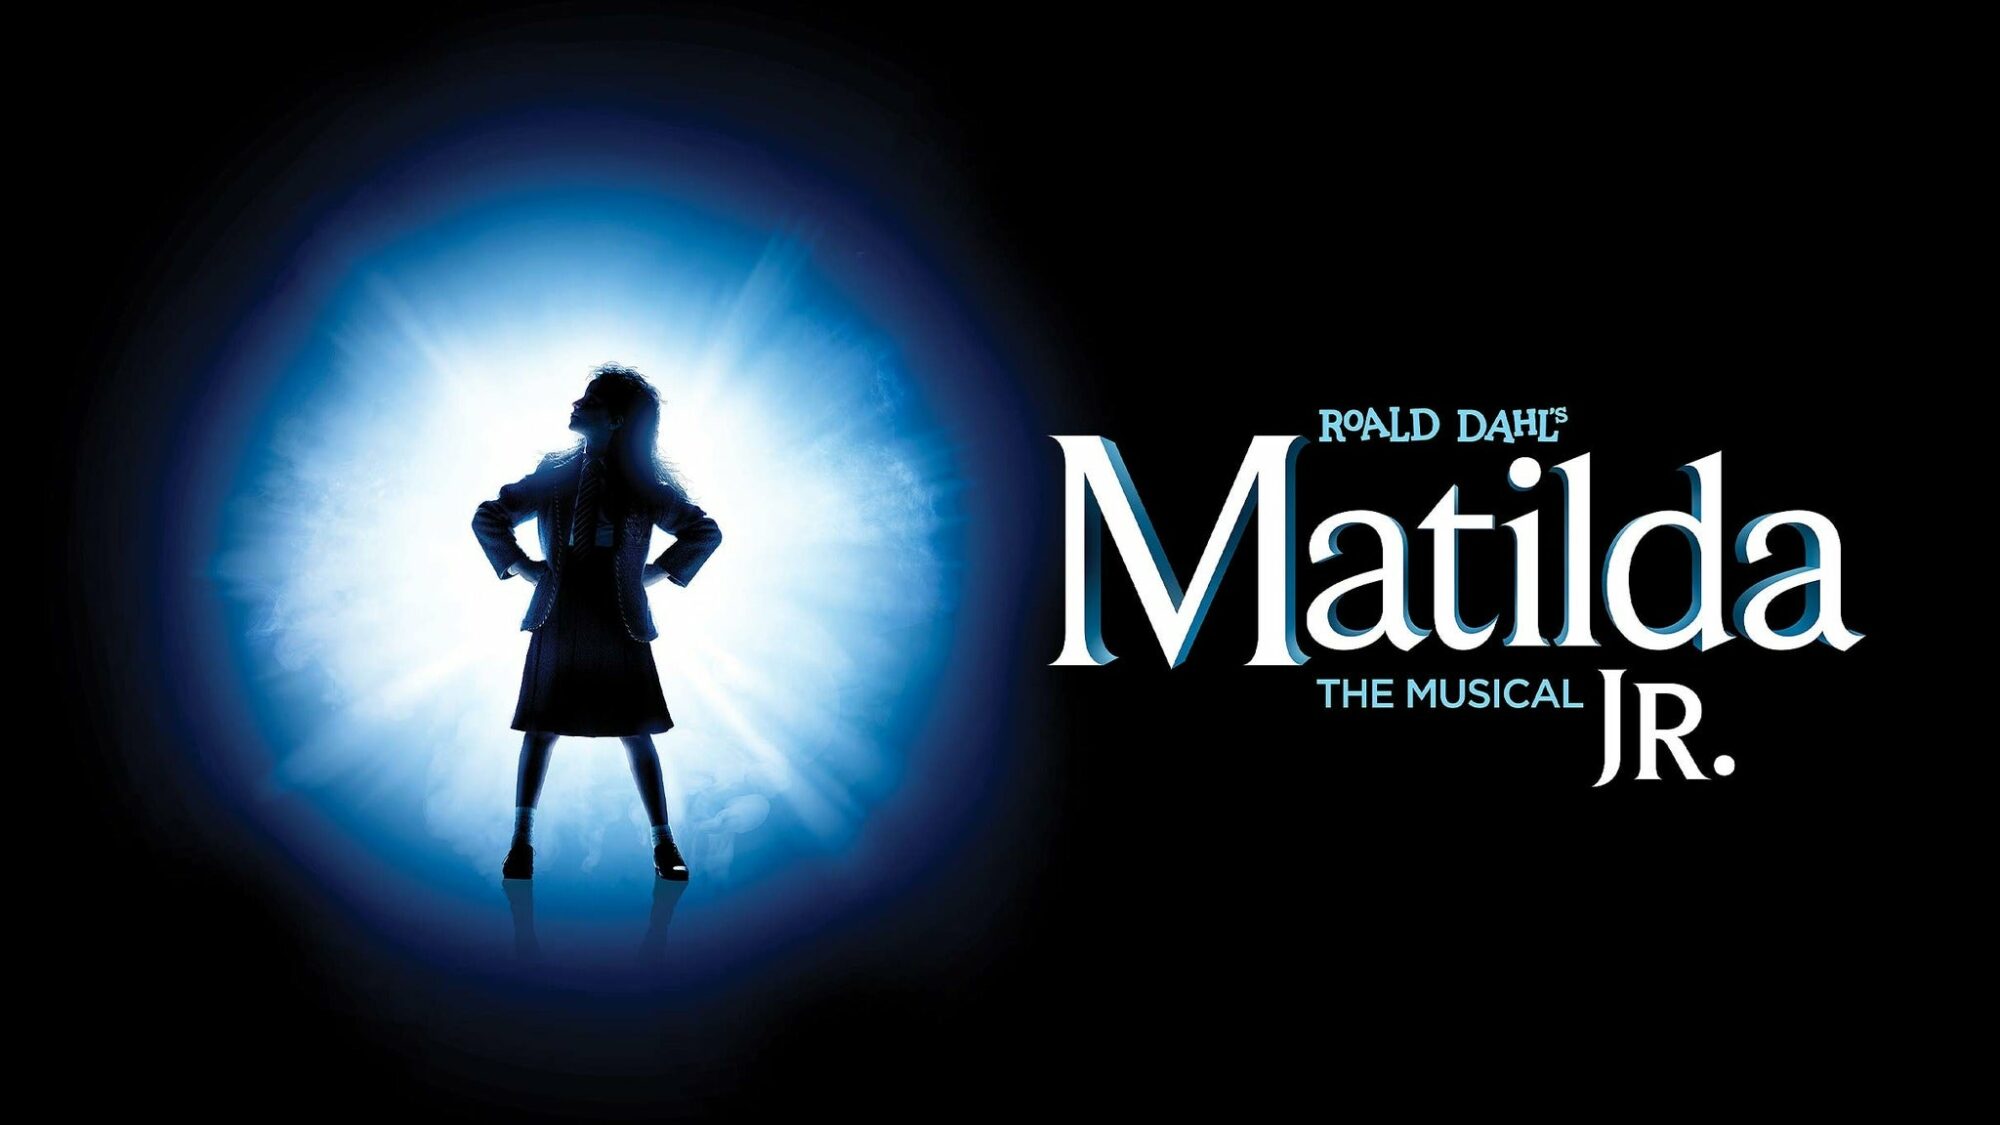 Image name Matilda Jr The Musical at Whitby Pavilion Theatre Whitby the 1 image from the post Matilda Jr: The Musical at Whitby Pavilion Theatre, Whitby in Yorkshire.com.